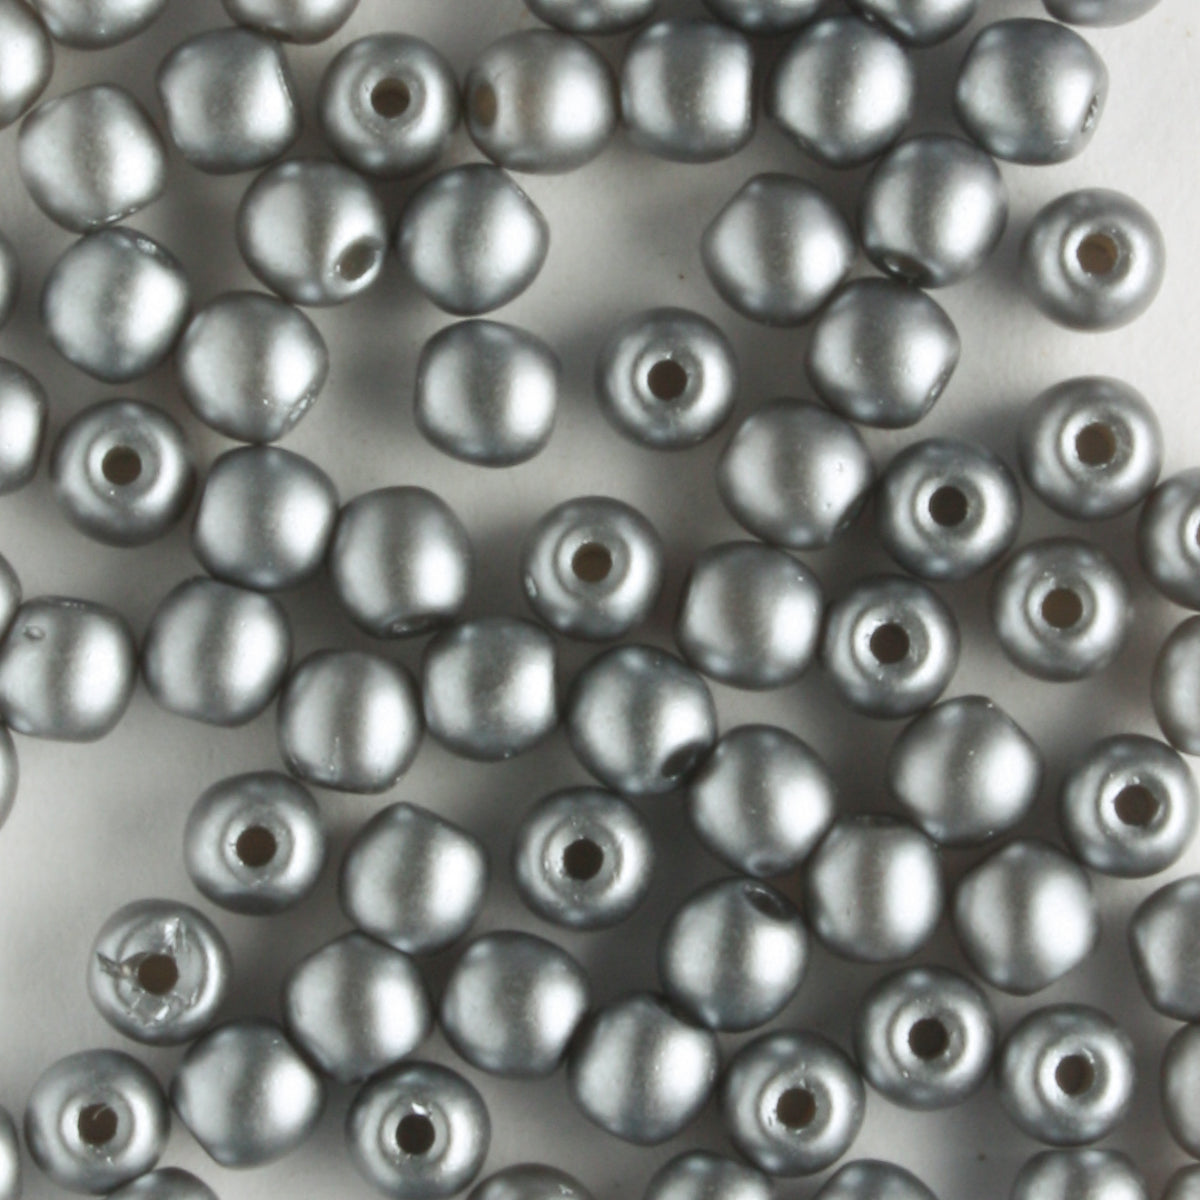 3mm Round Glass Pearls Silver - 100 beads